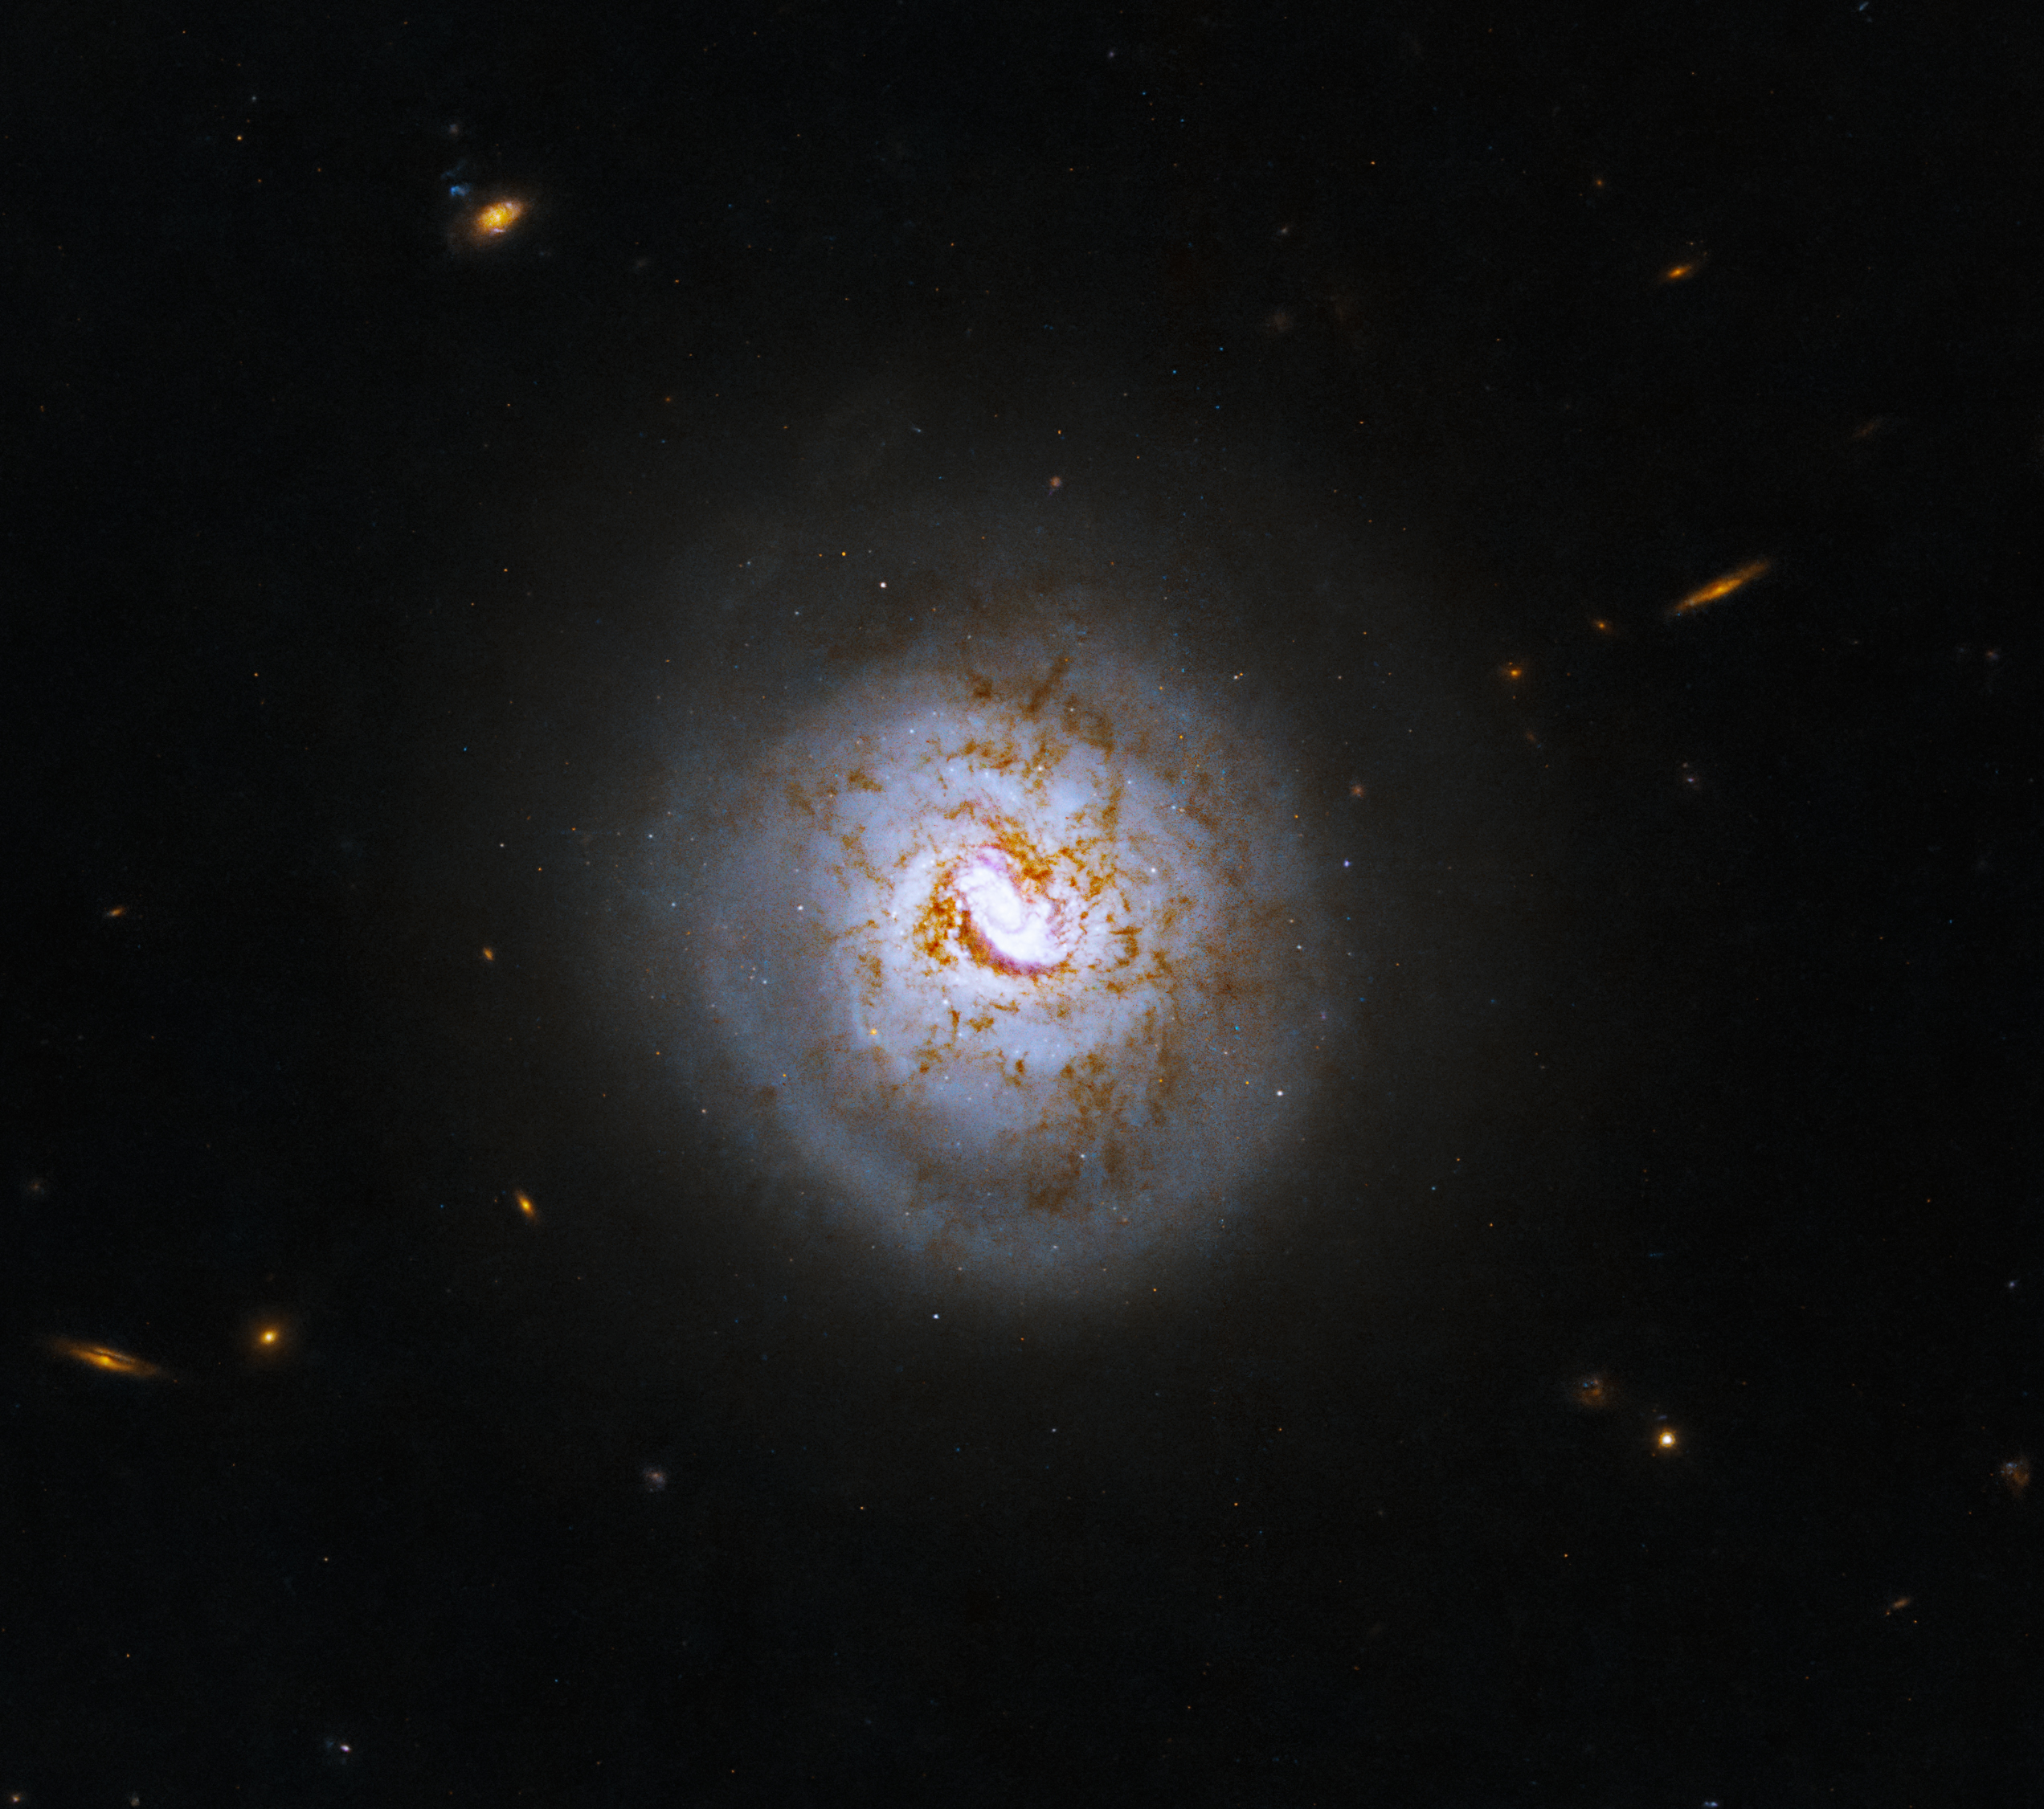 A glowing, white galaxy shines at the center of the image, interlaced with dark brown dust. More distant galaxies and stars fill the black background of space.